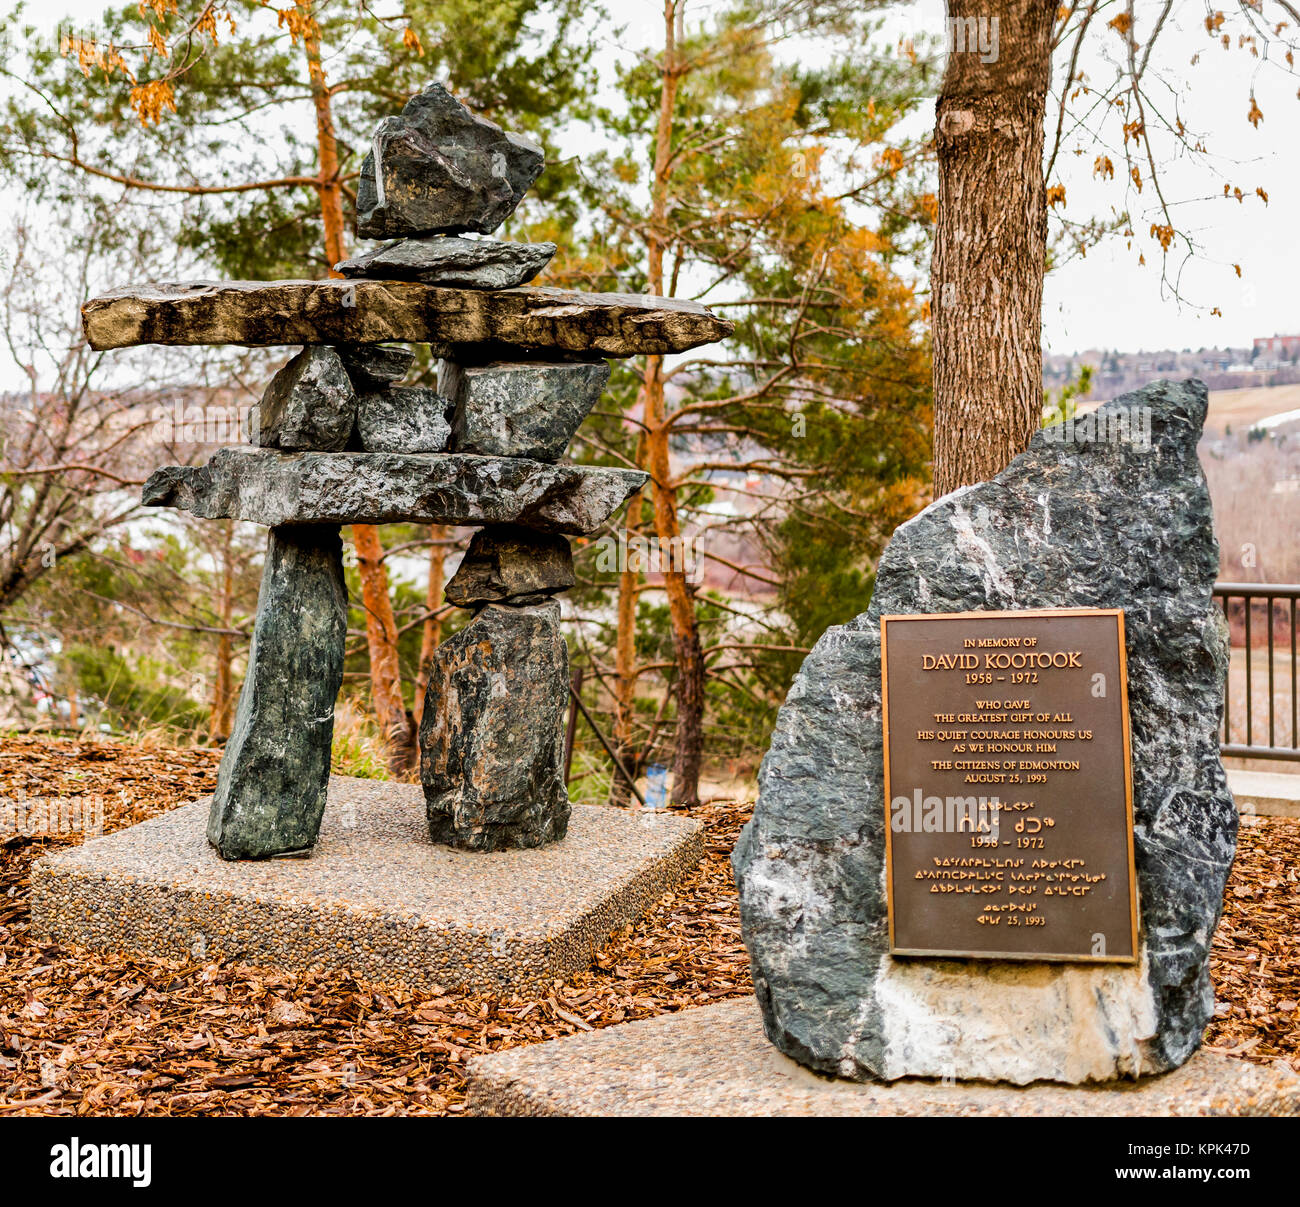 A memorial plaque with inukshuk among some trees in autumn; Edmonton, Alberta, Canada Stock Photo